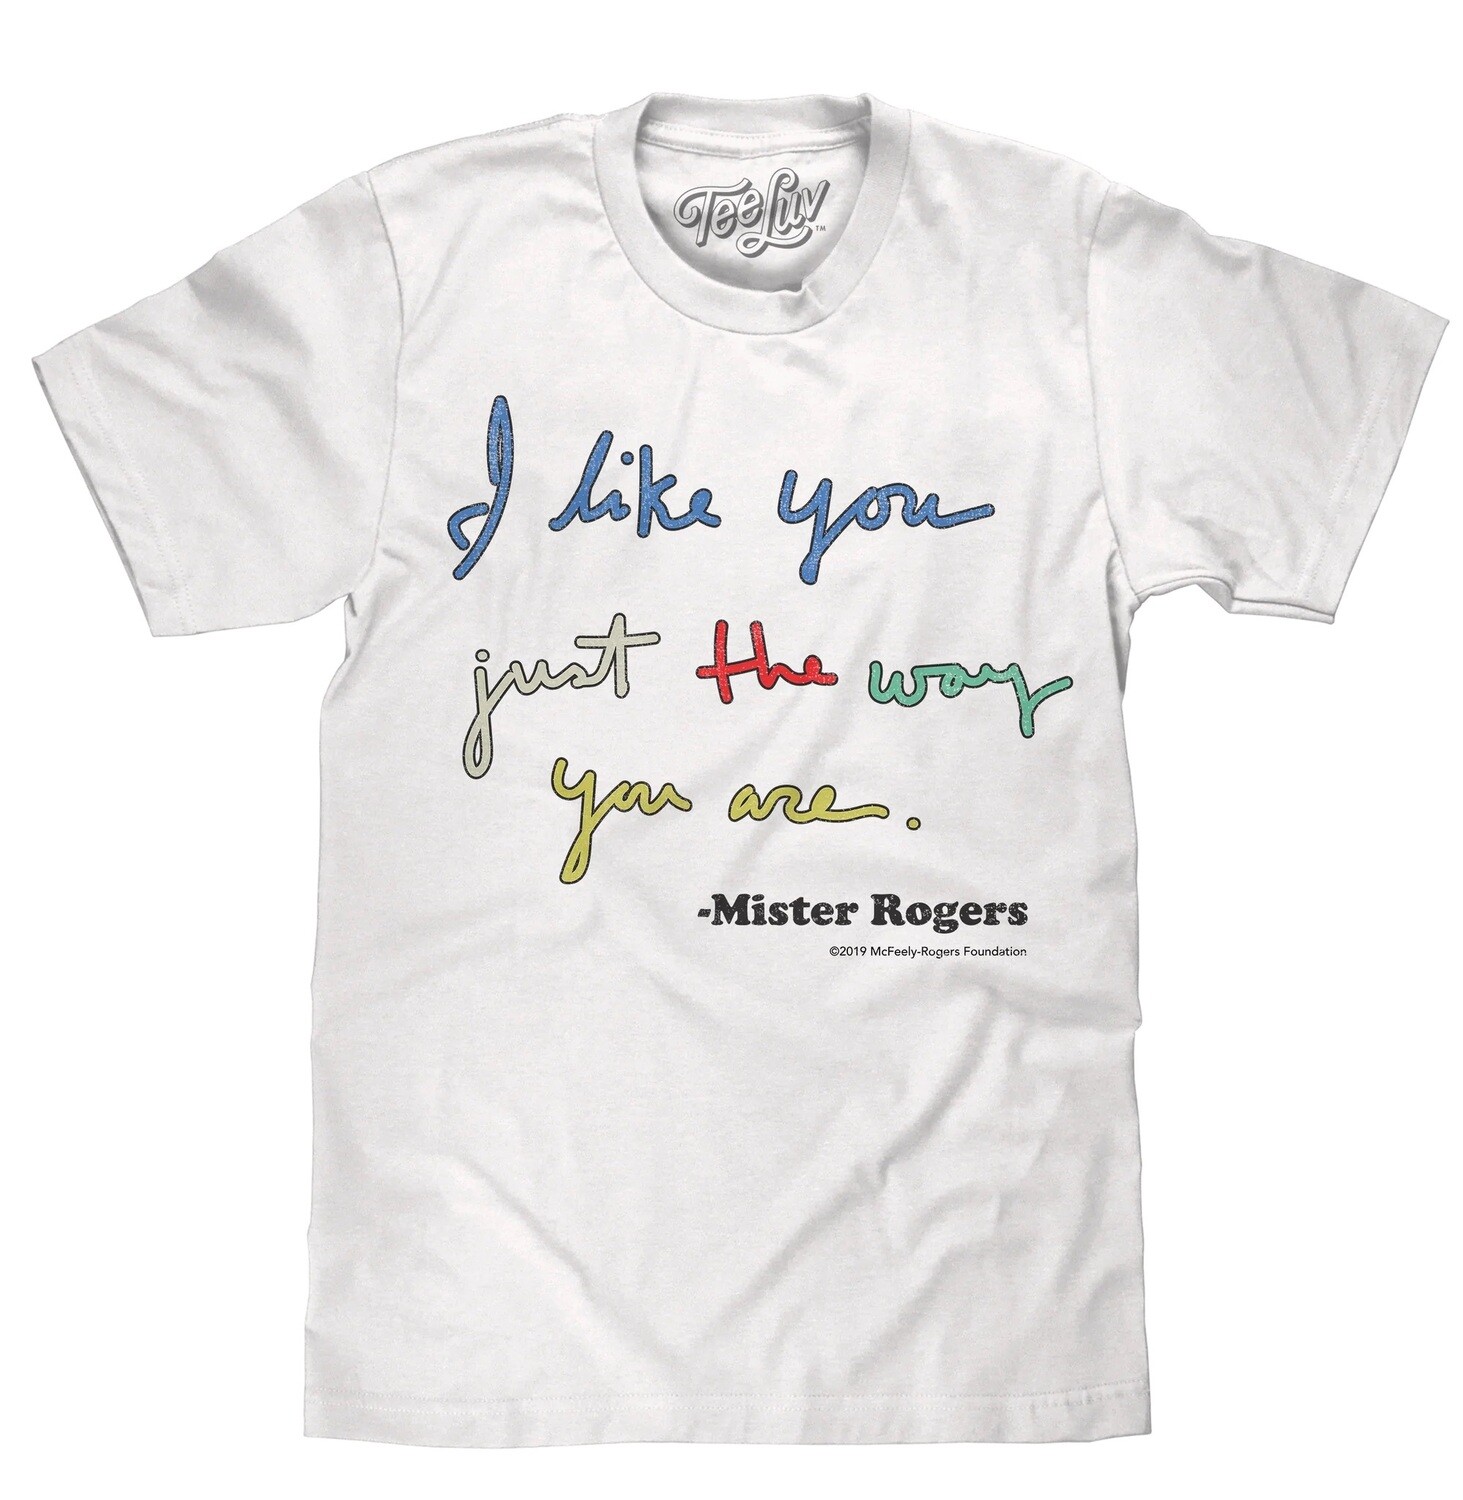 Mr Rogers "I Like You Just the way You Are"